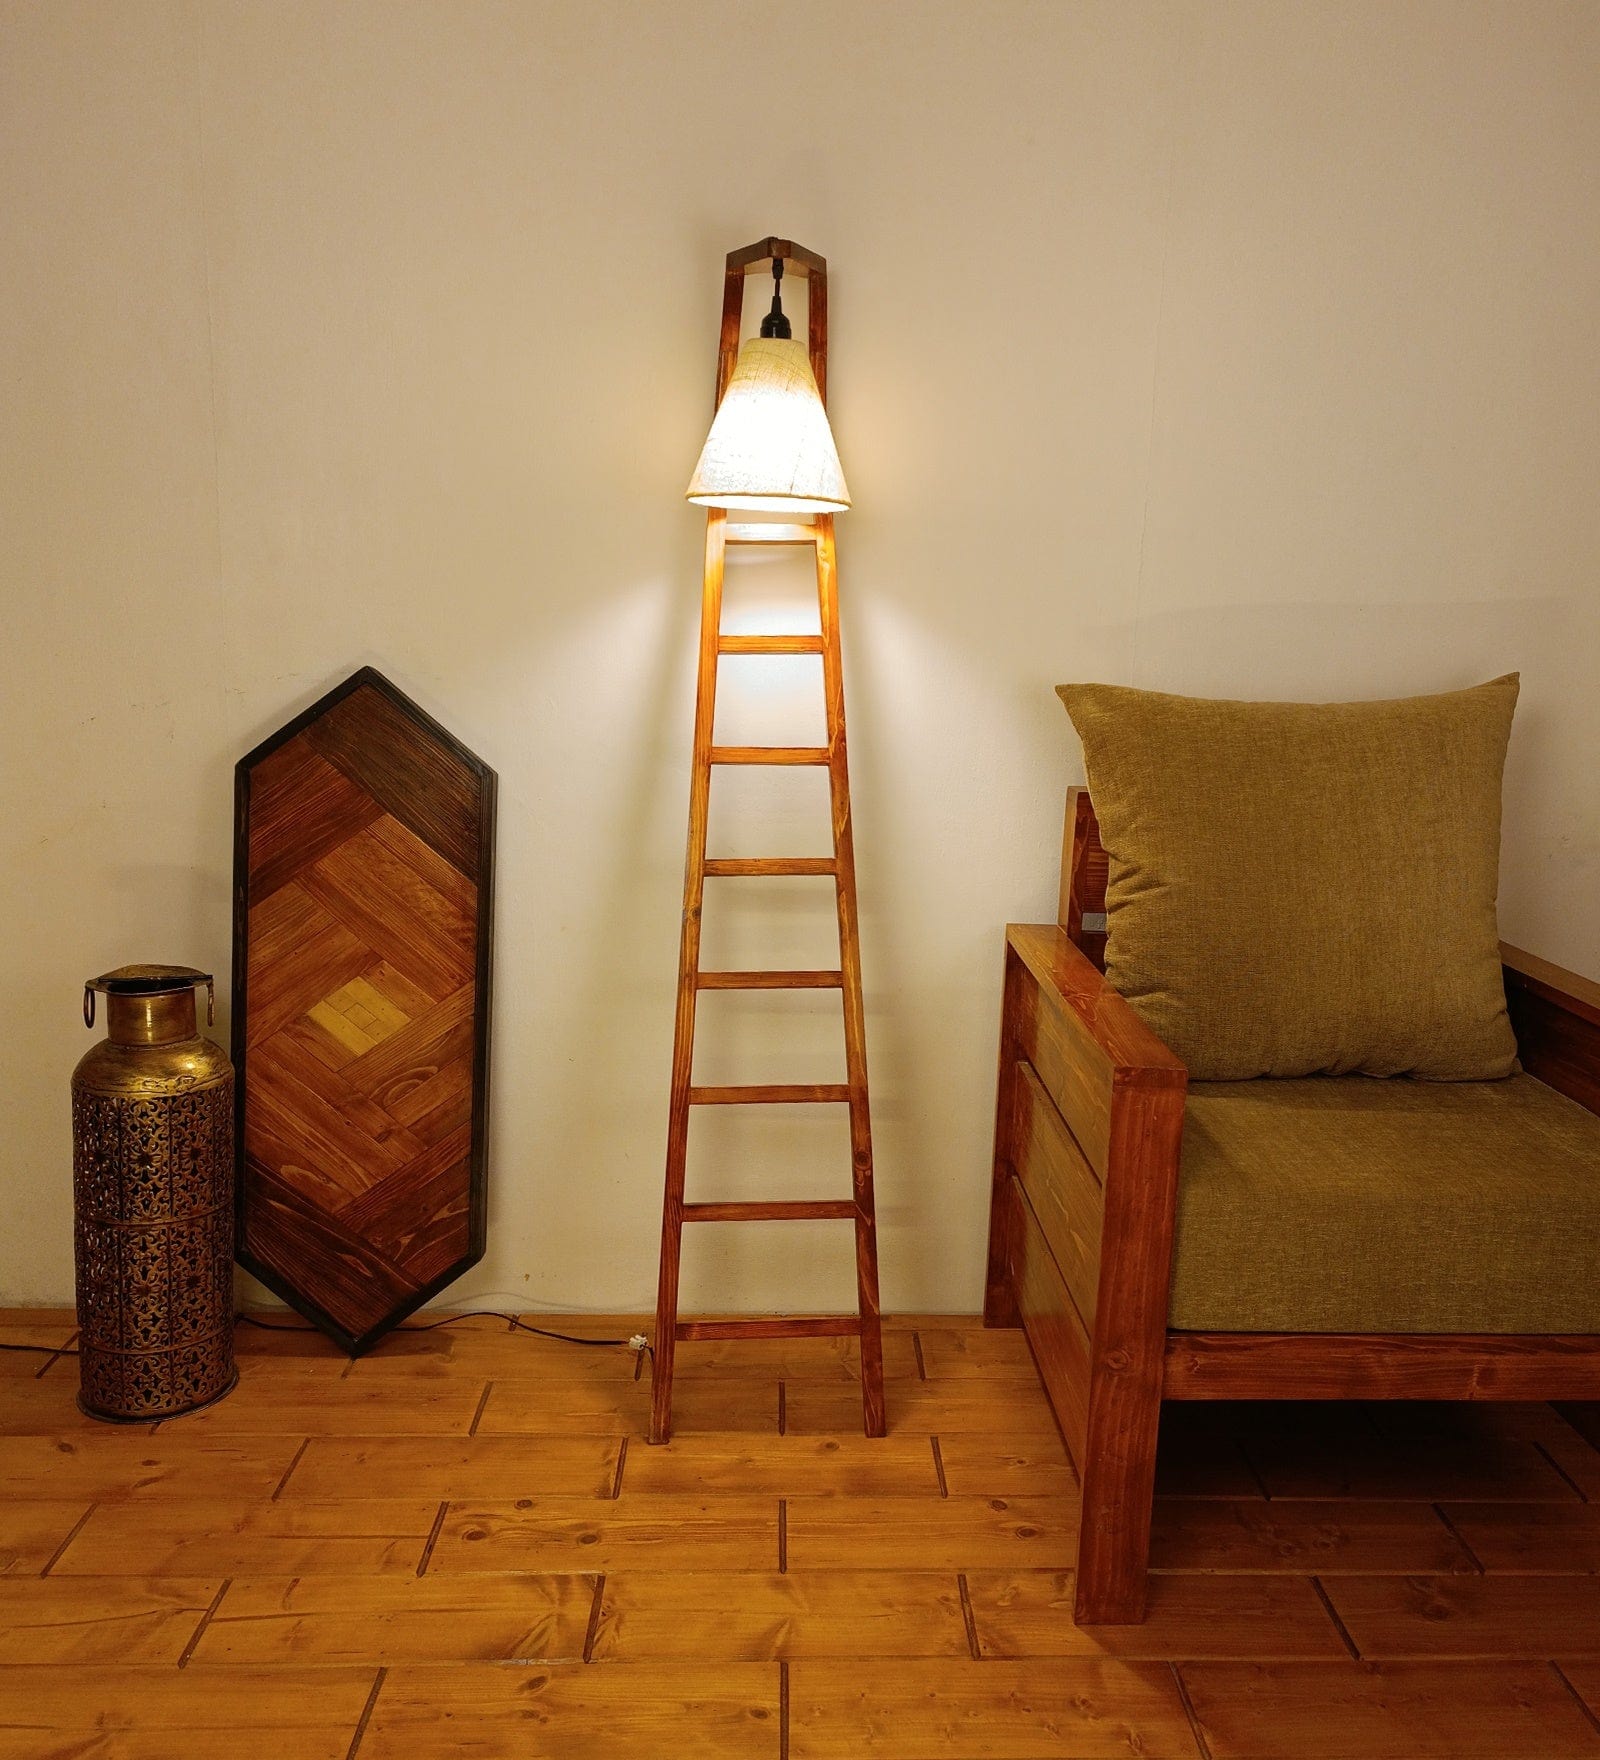 Stairway Wooden Floor Lamp with Brown Base and Jute Fabric Lampshade (BULB NOT INCLUDED)